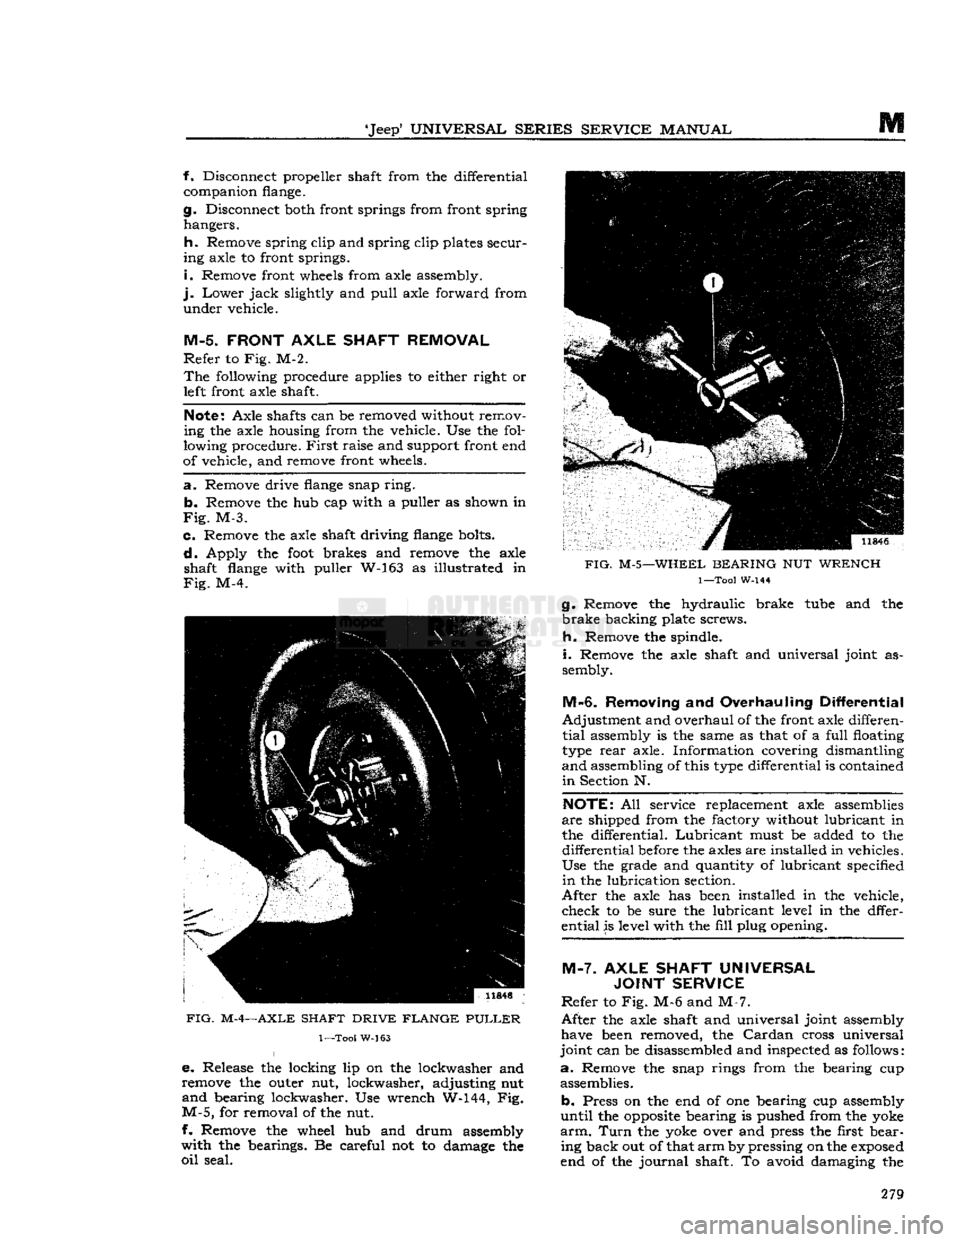 JEEP CJ 1953  Service Manual 
Jeep*
 UNIVERSAL
 SERIES
 SERVICE
 MANUAL 

m f. Disconnect propeller shaft from the differential 
companion flange. 

g.
 Disconnect both front springs from front spring  hangers. 

h.
 Remove spri